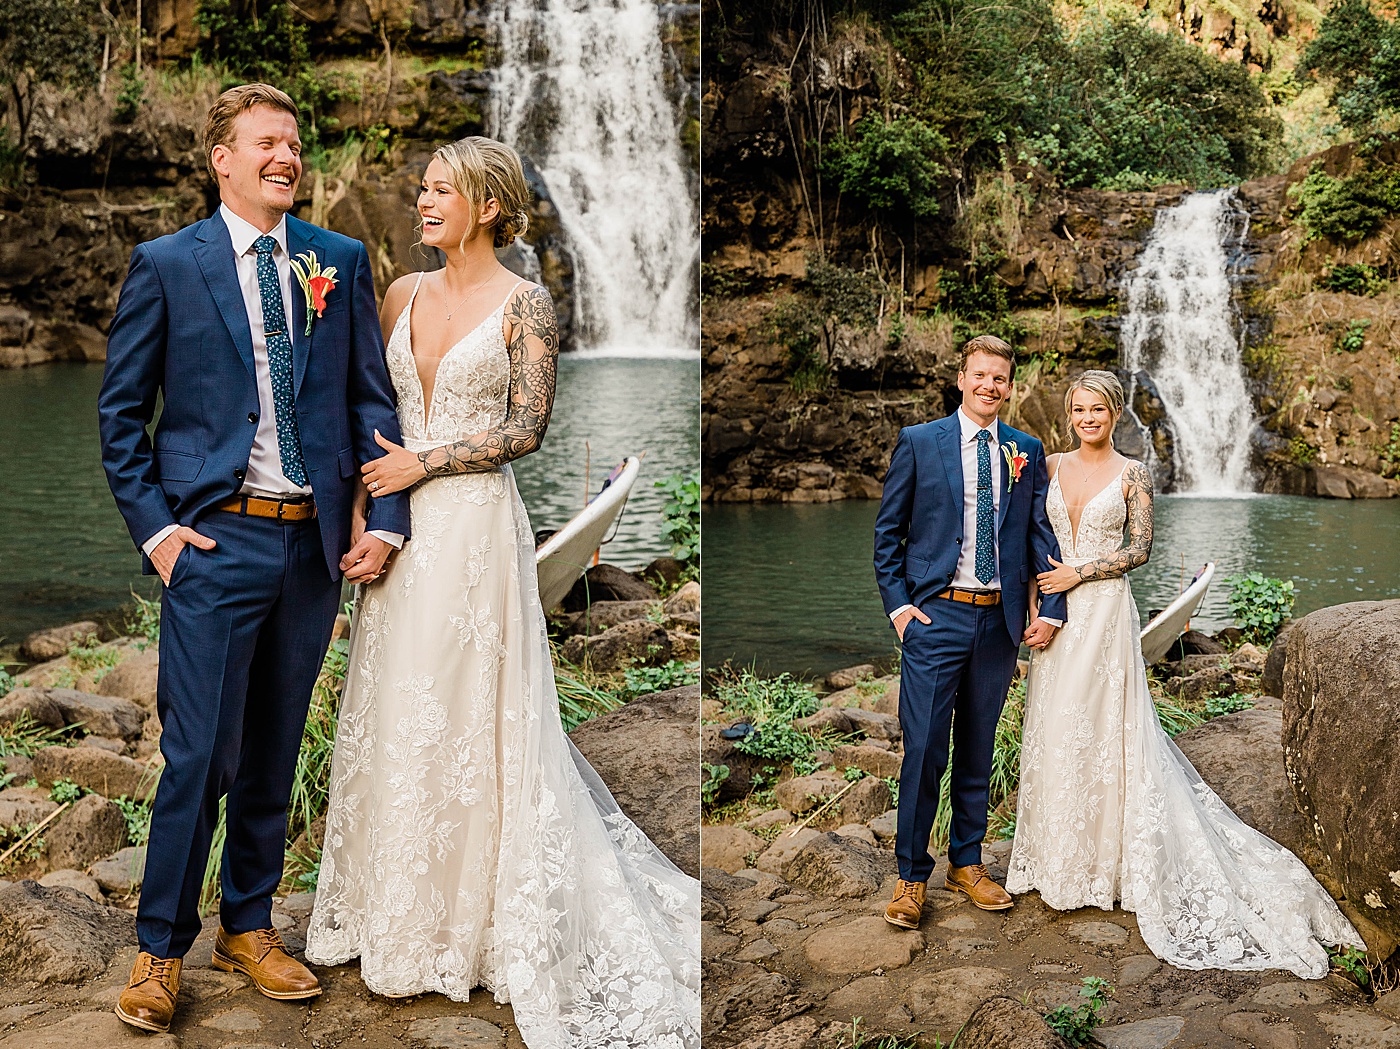 Waimea Valley wedding. Bride and groom holding hands and laughing in front of waterfall.